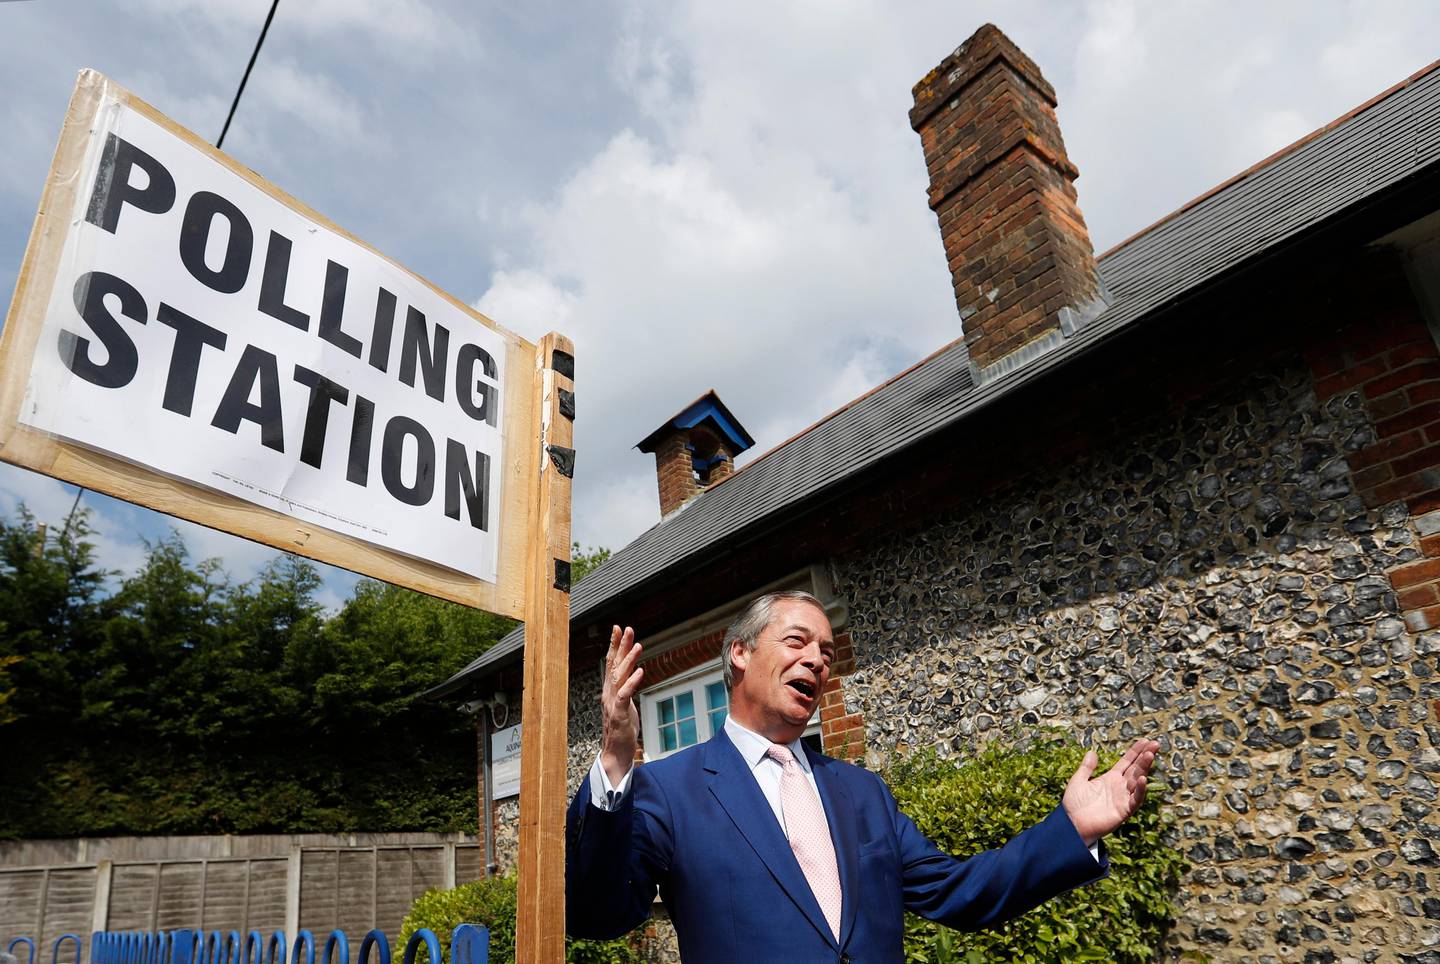 Brexit Party leader Nigel Farage speaks as he stands outside the polling station at Cudham Primary School in Biggin Hill, England, Thursday, May 23, 2019. Some 400 million Europeans from 28 countries head to the polls from Thursday to Sunday to choose their representatives at the European Parliament for the next five years. (AP Photo/Alastair Grant)